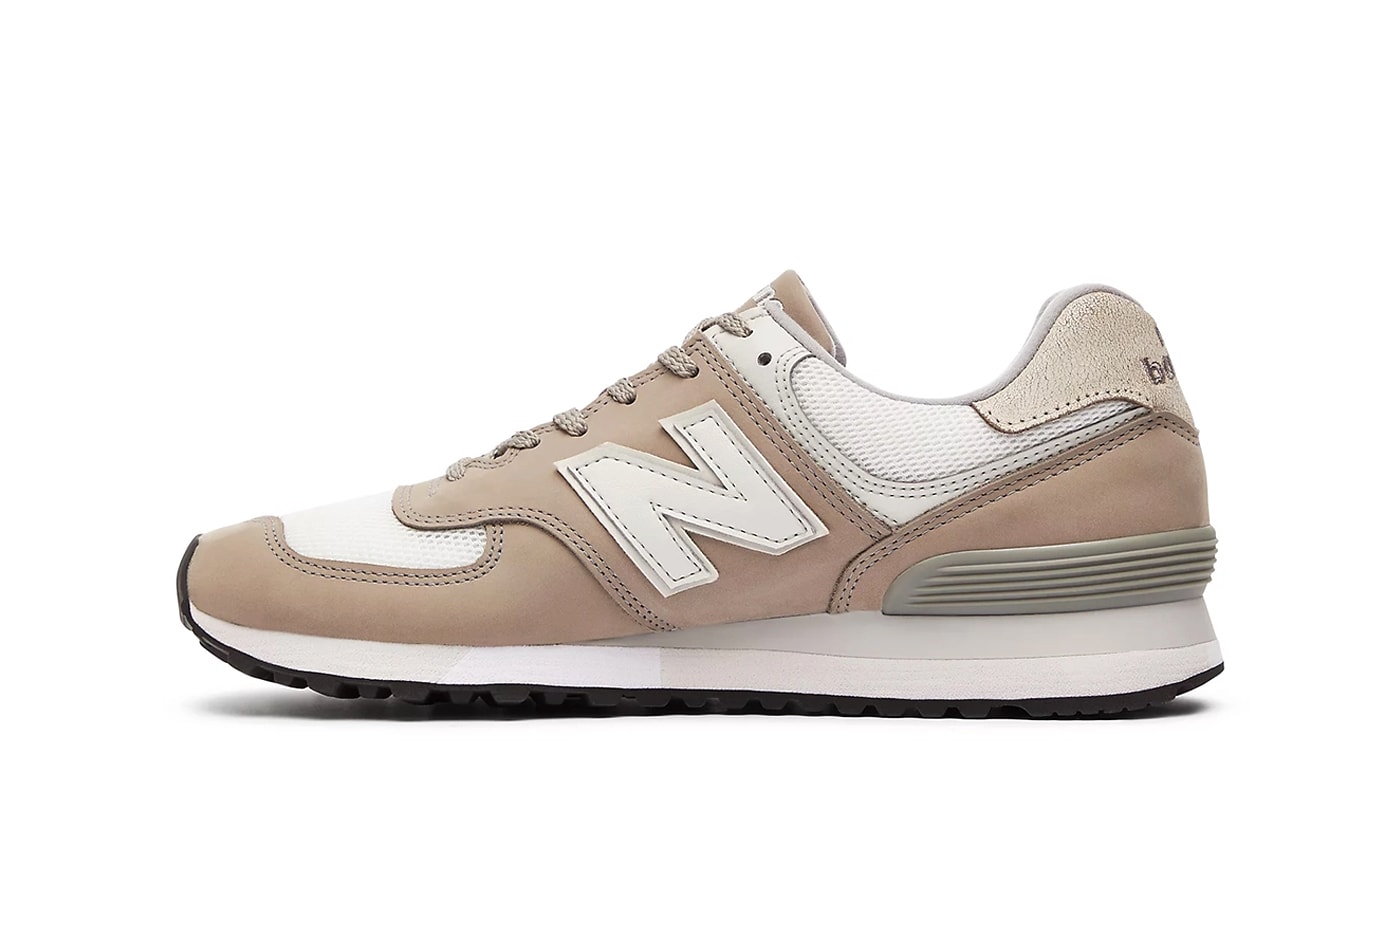 New Balance 576 Made in UK 最新配色「Toasted Nut」